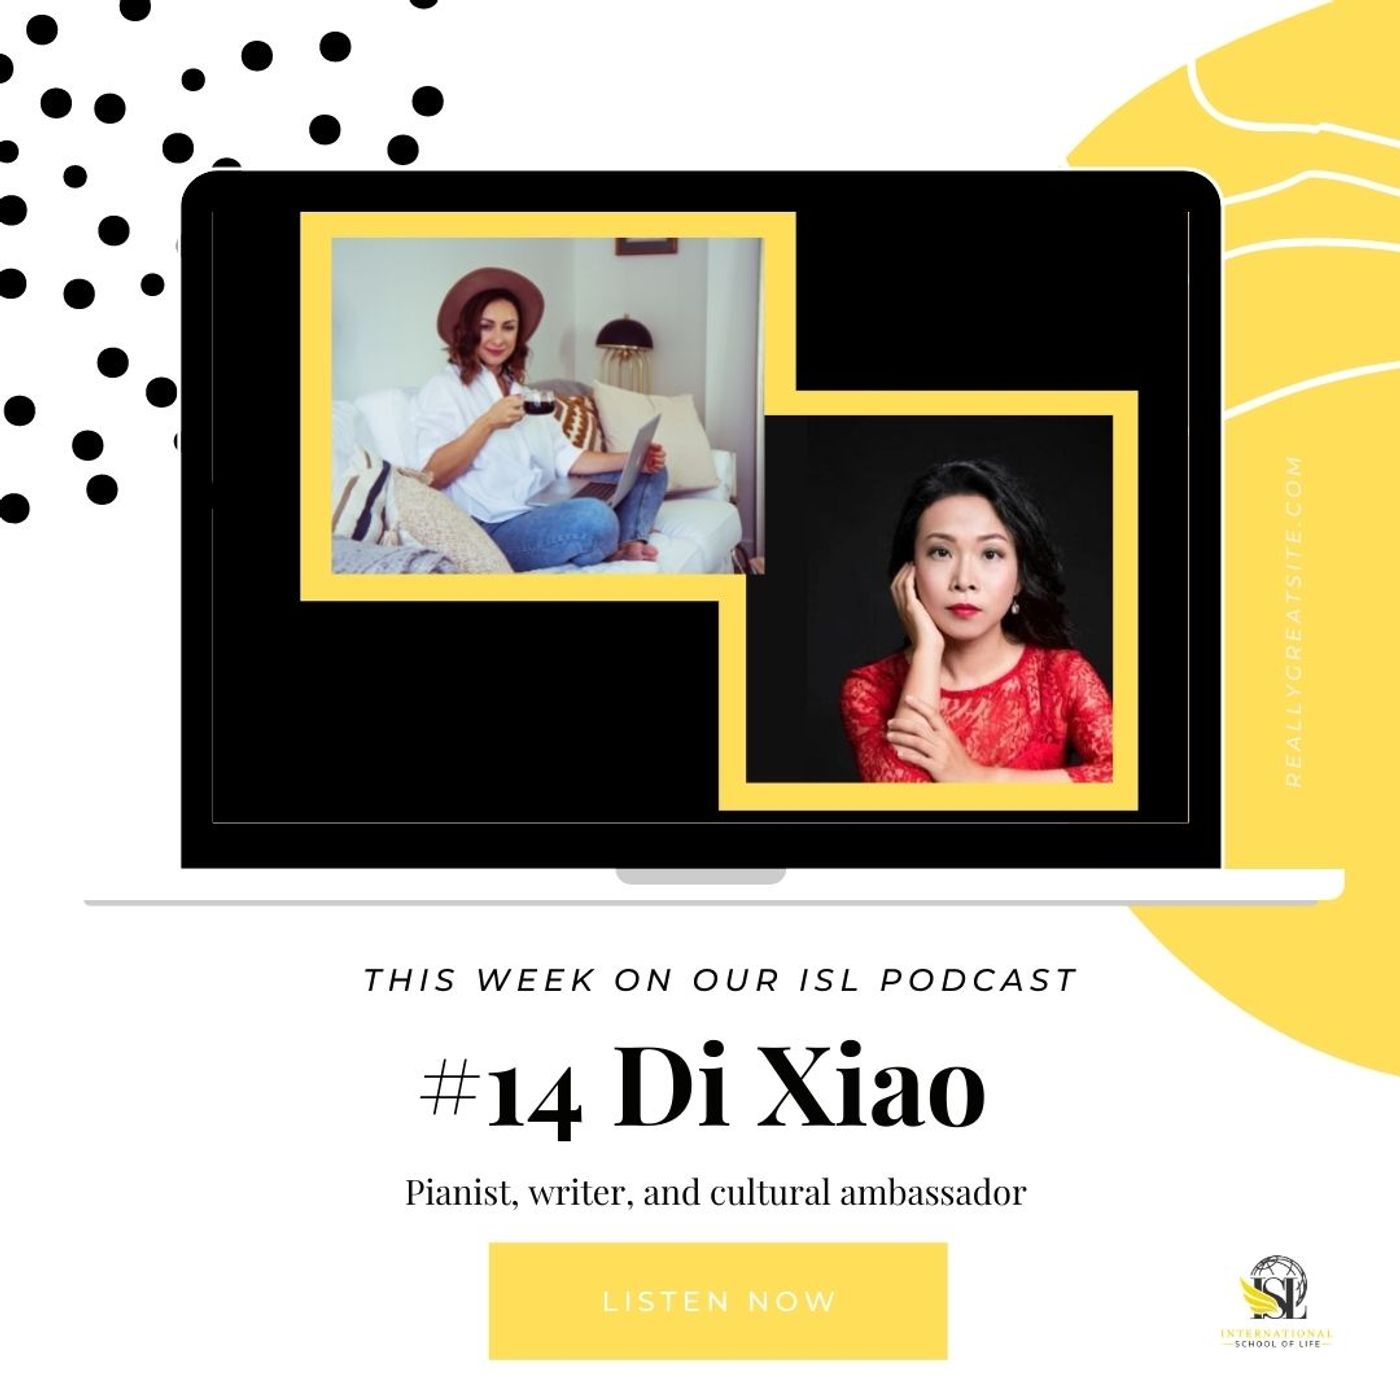 #14 Interview with Di Xiao – Pianist, writer, and cultural ambassador